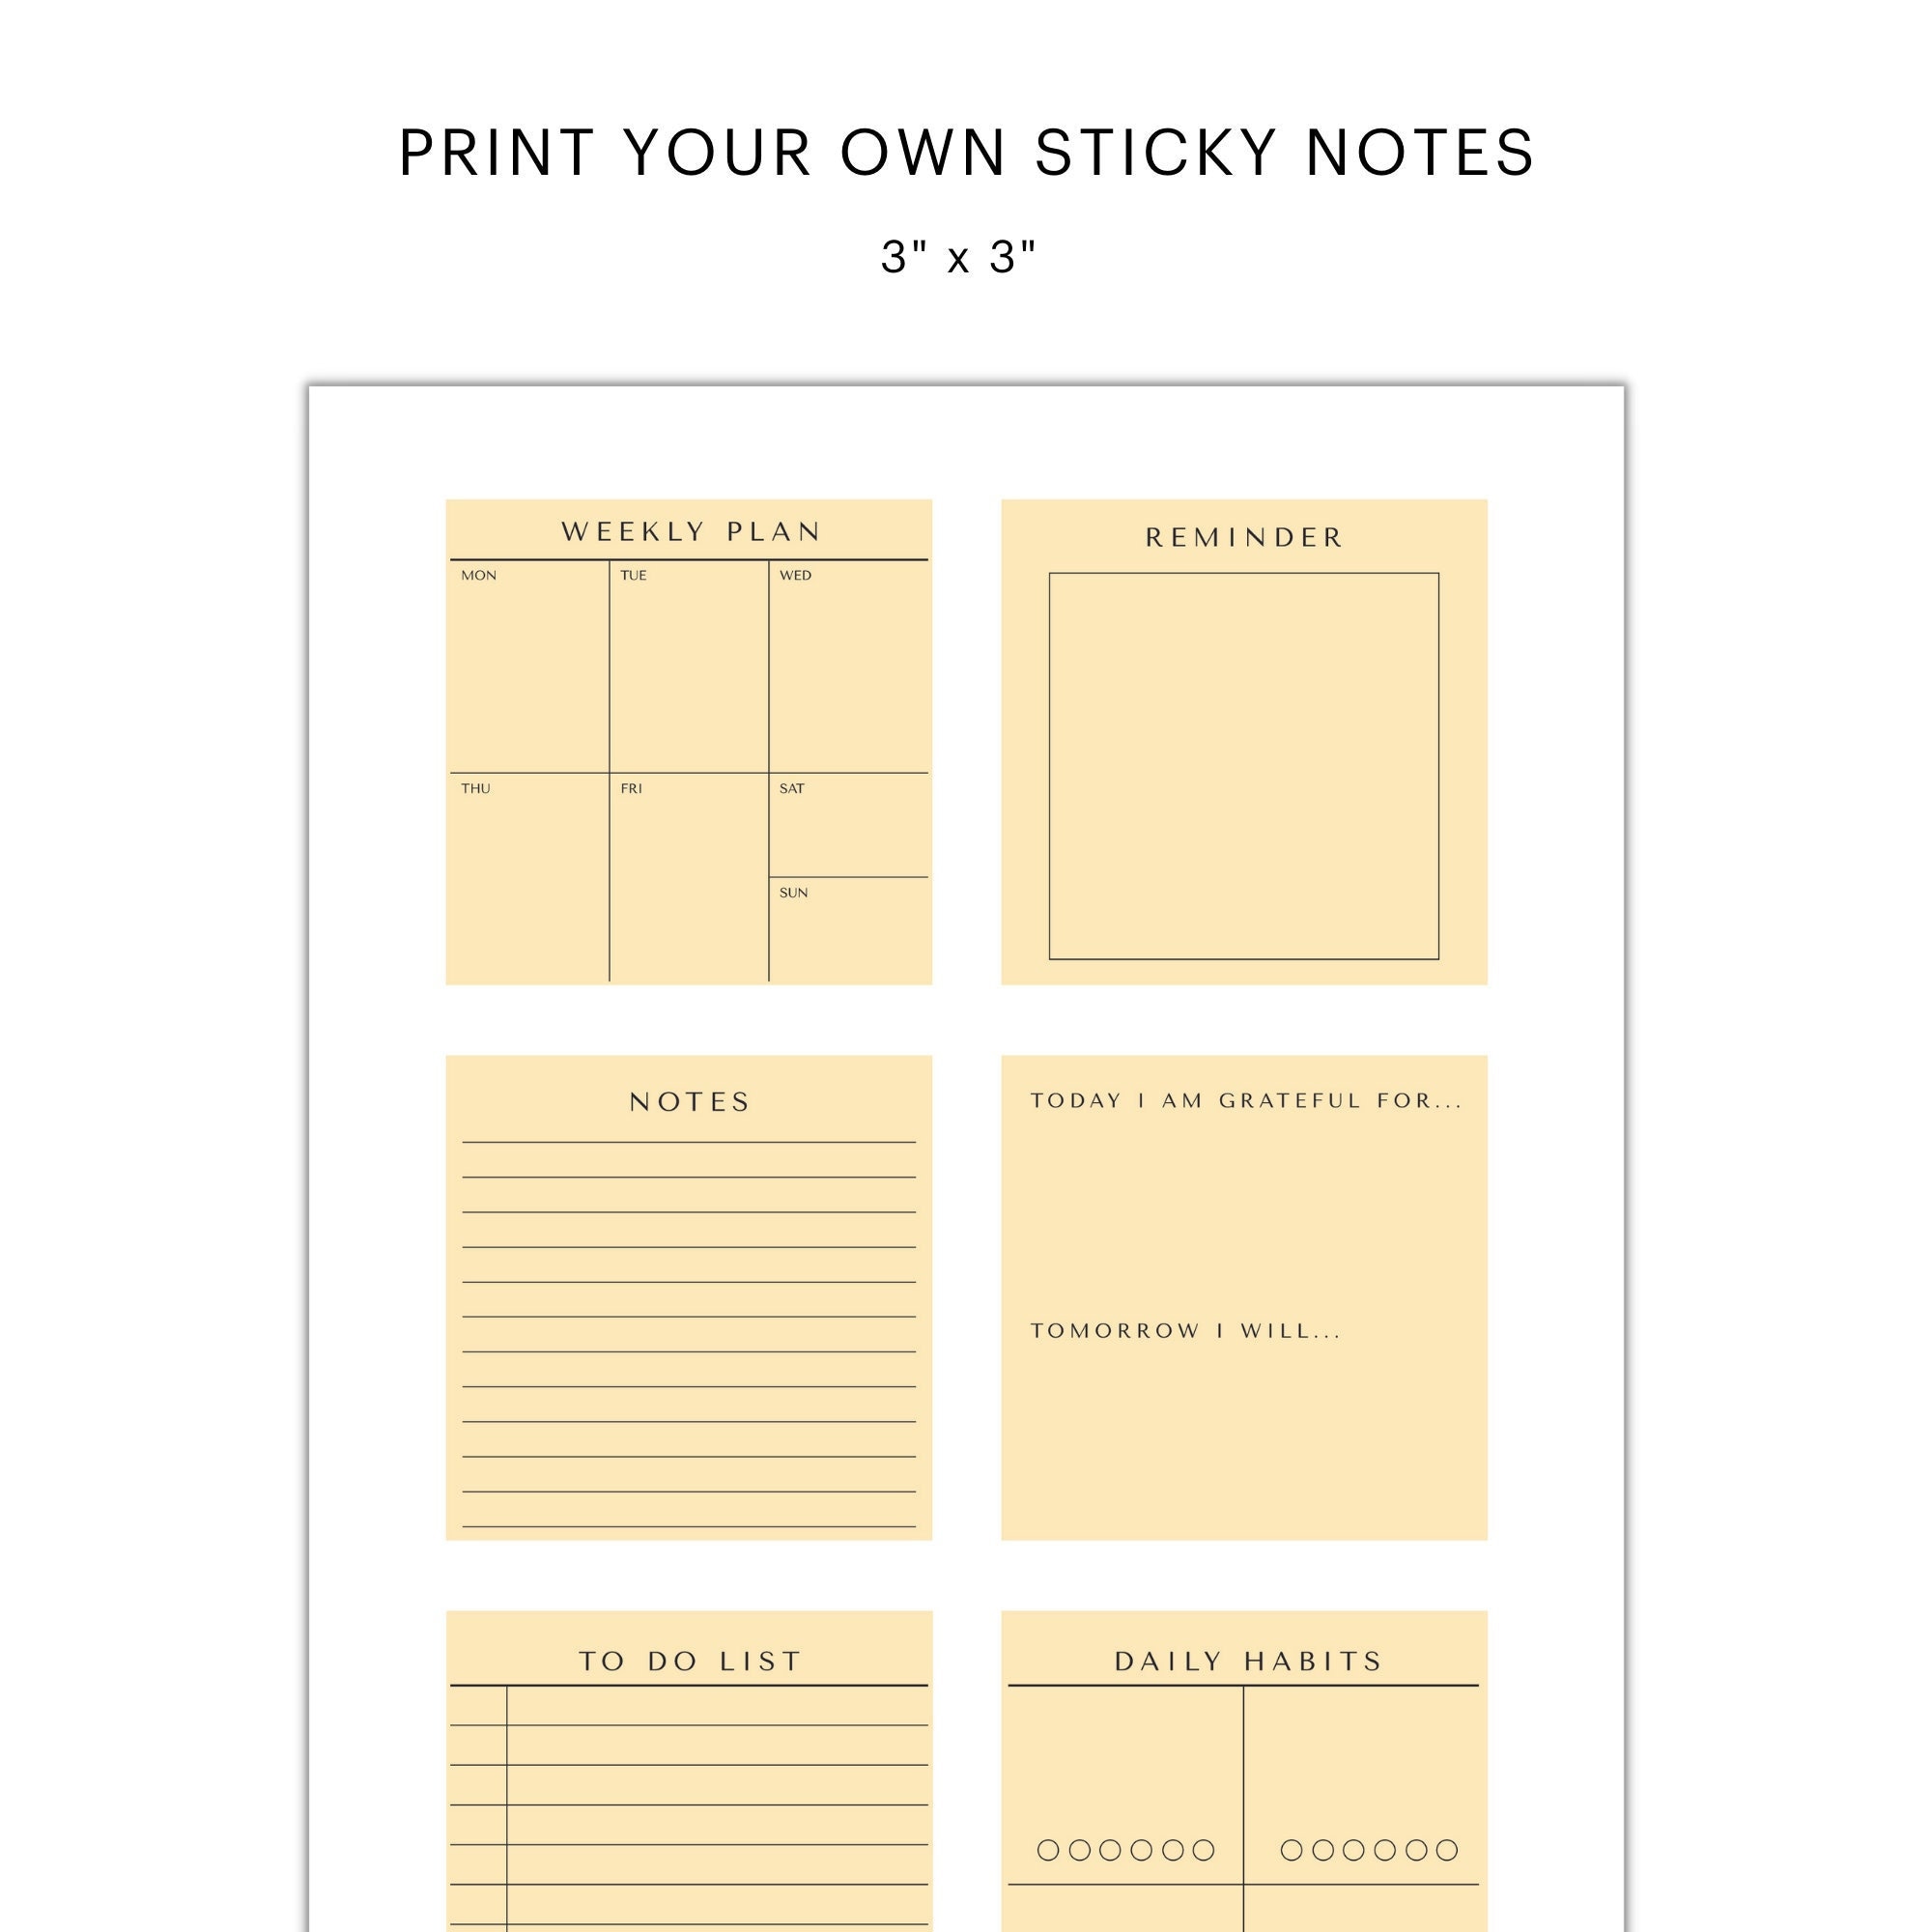 Printable Post-it Notes: Free layout to print and make your own!